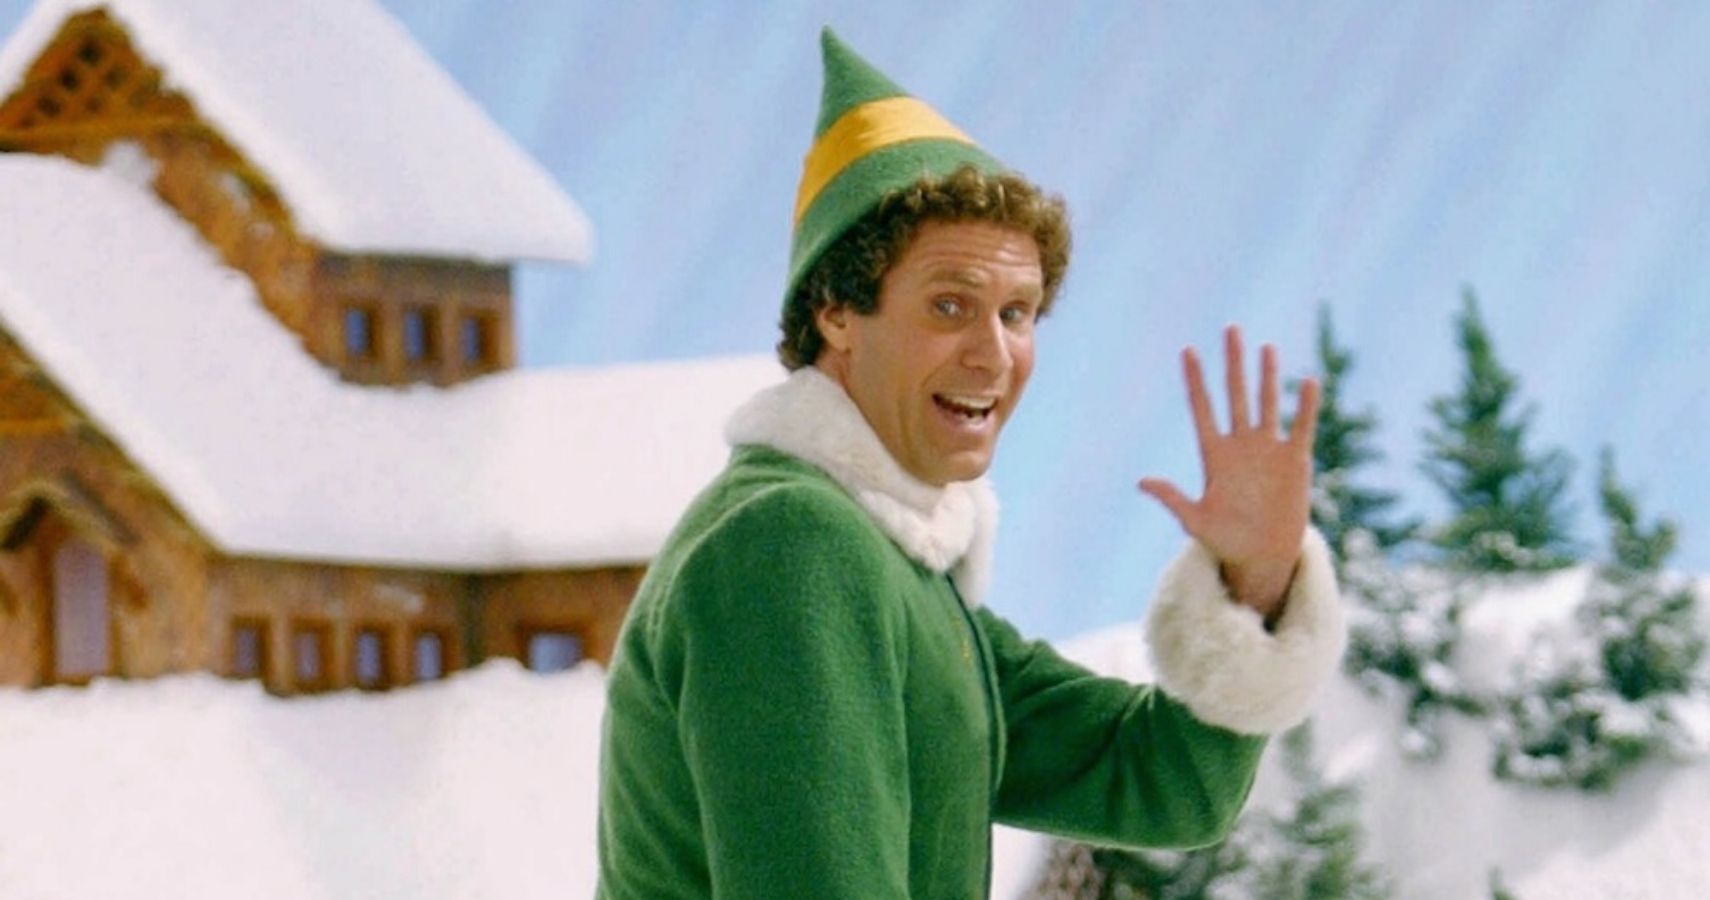 Elf 10 Facts You Didn’t Know About Making The Classic